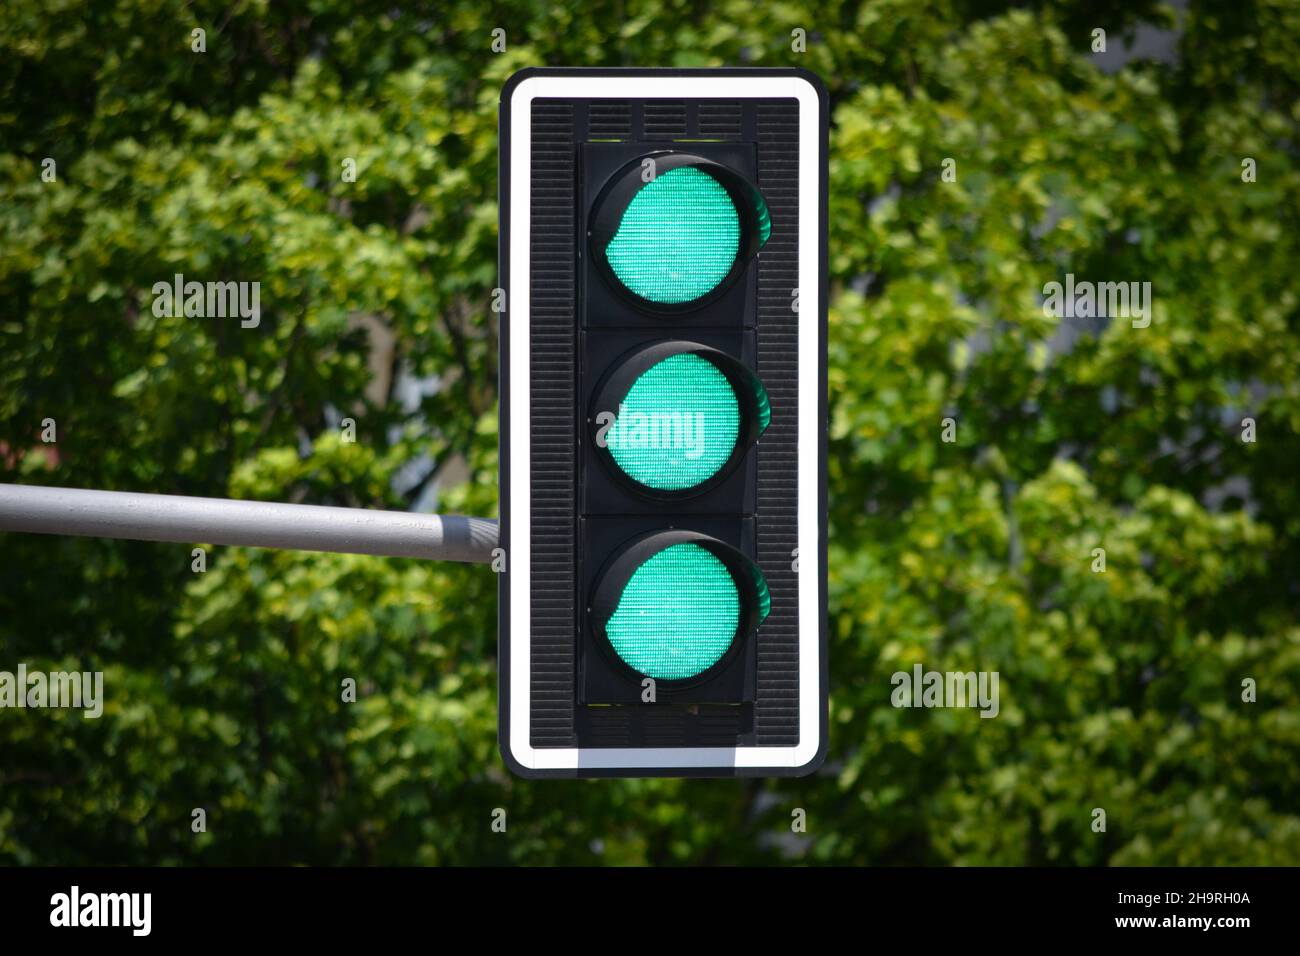 Traffic lights - green color Stock Photo